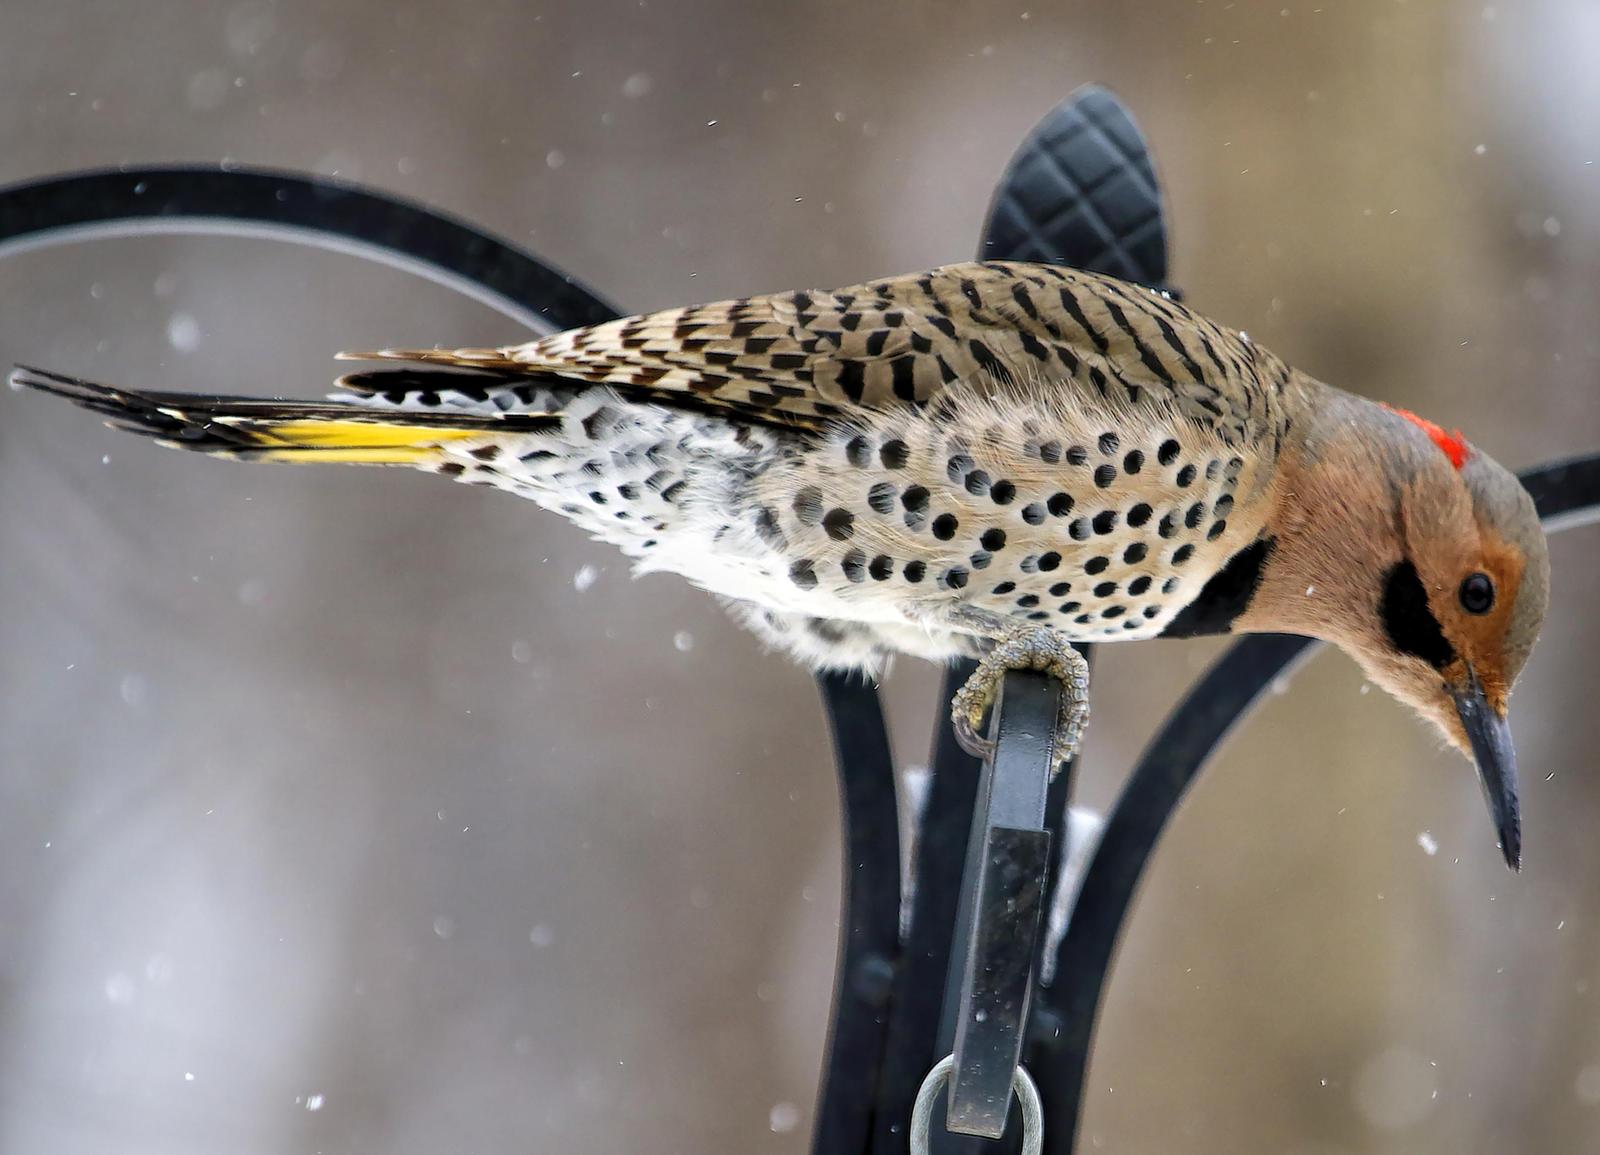 Northern Flicker (Yellow-shafted) Photo by Dan Tallman